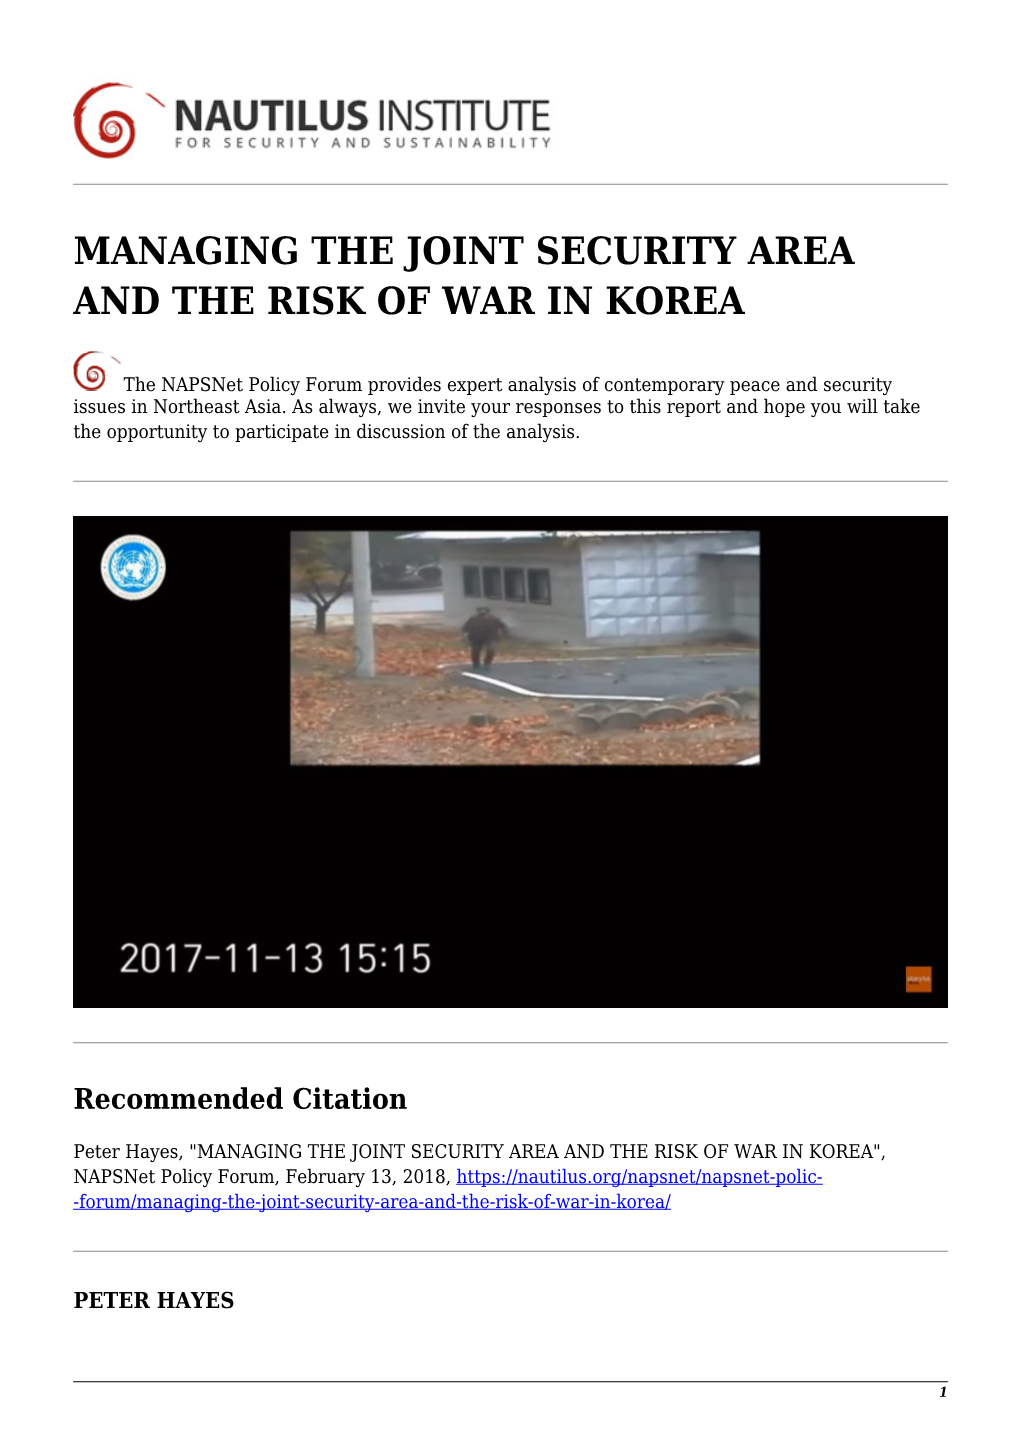 Managing the Joint Security Area and the Risk of War in Korea